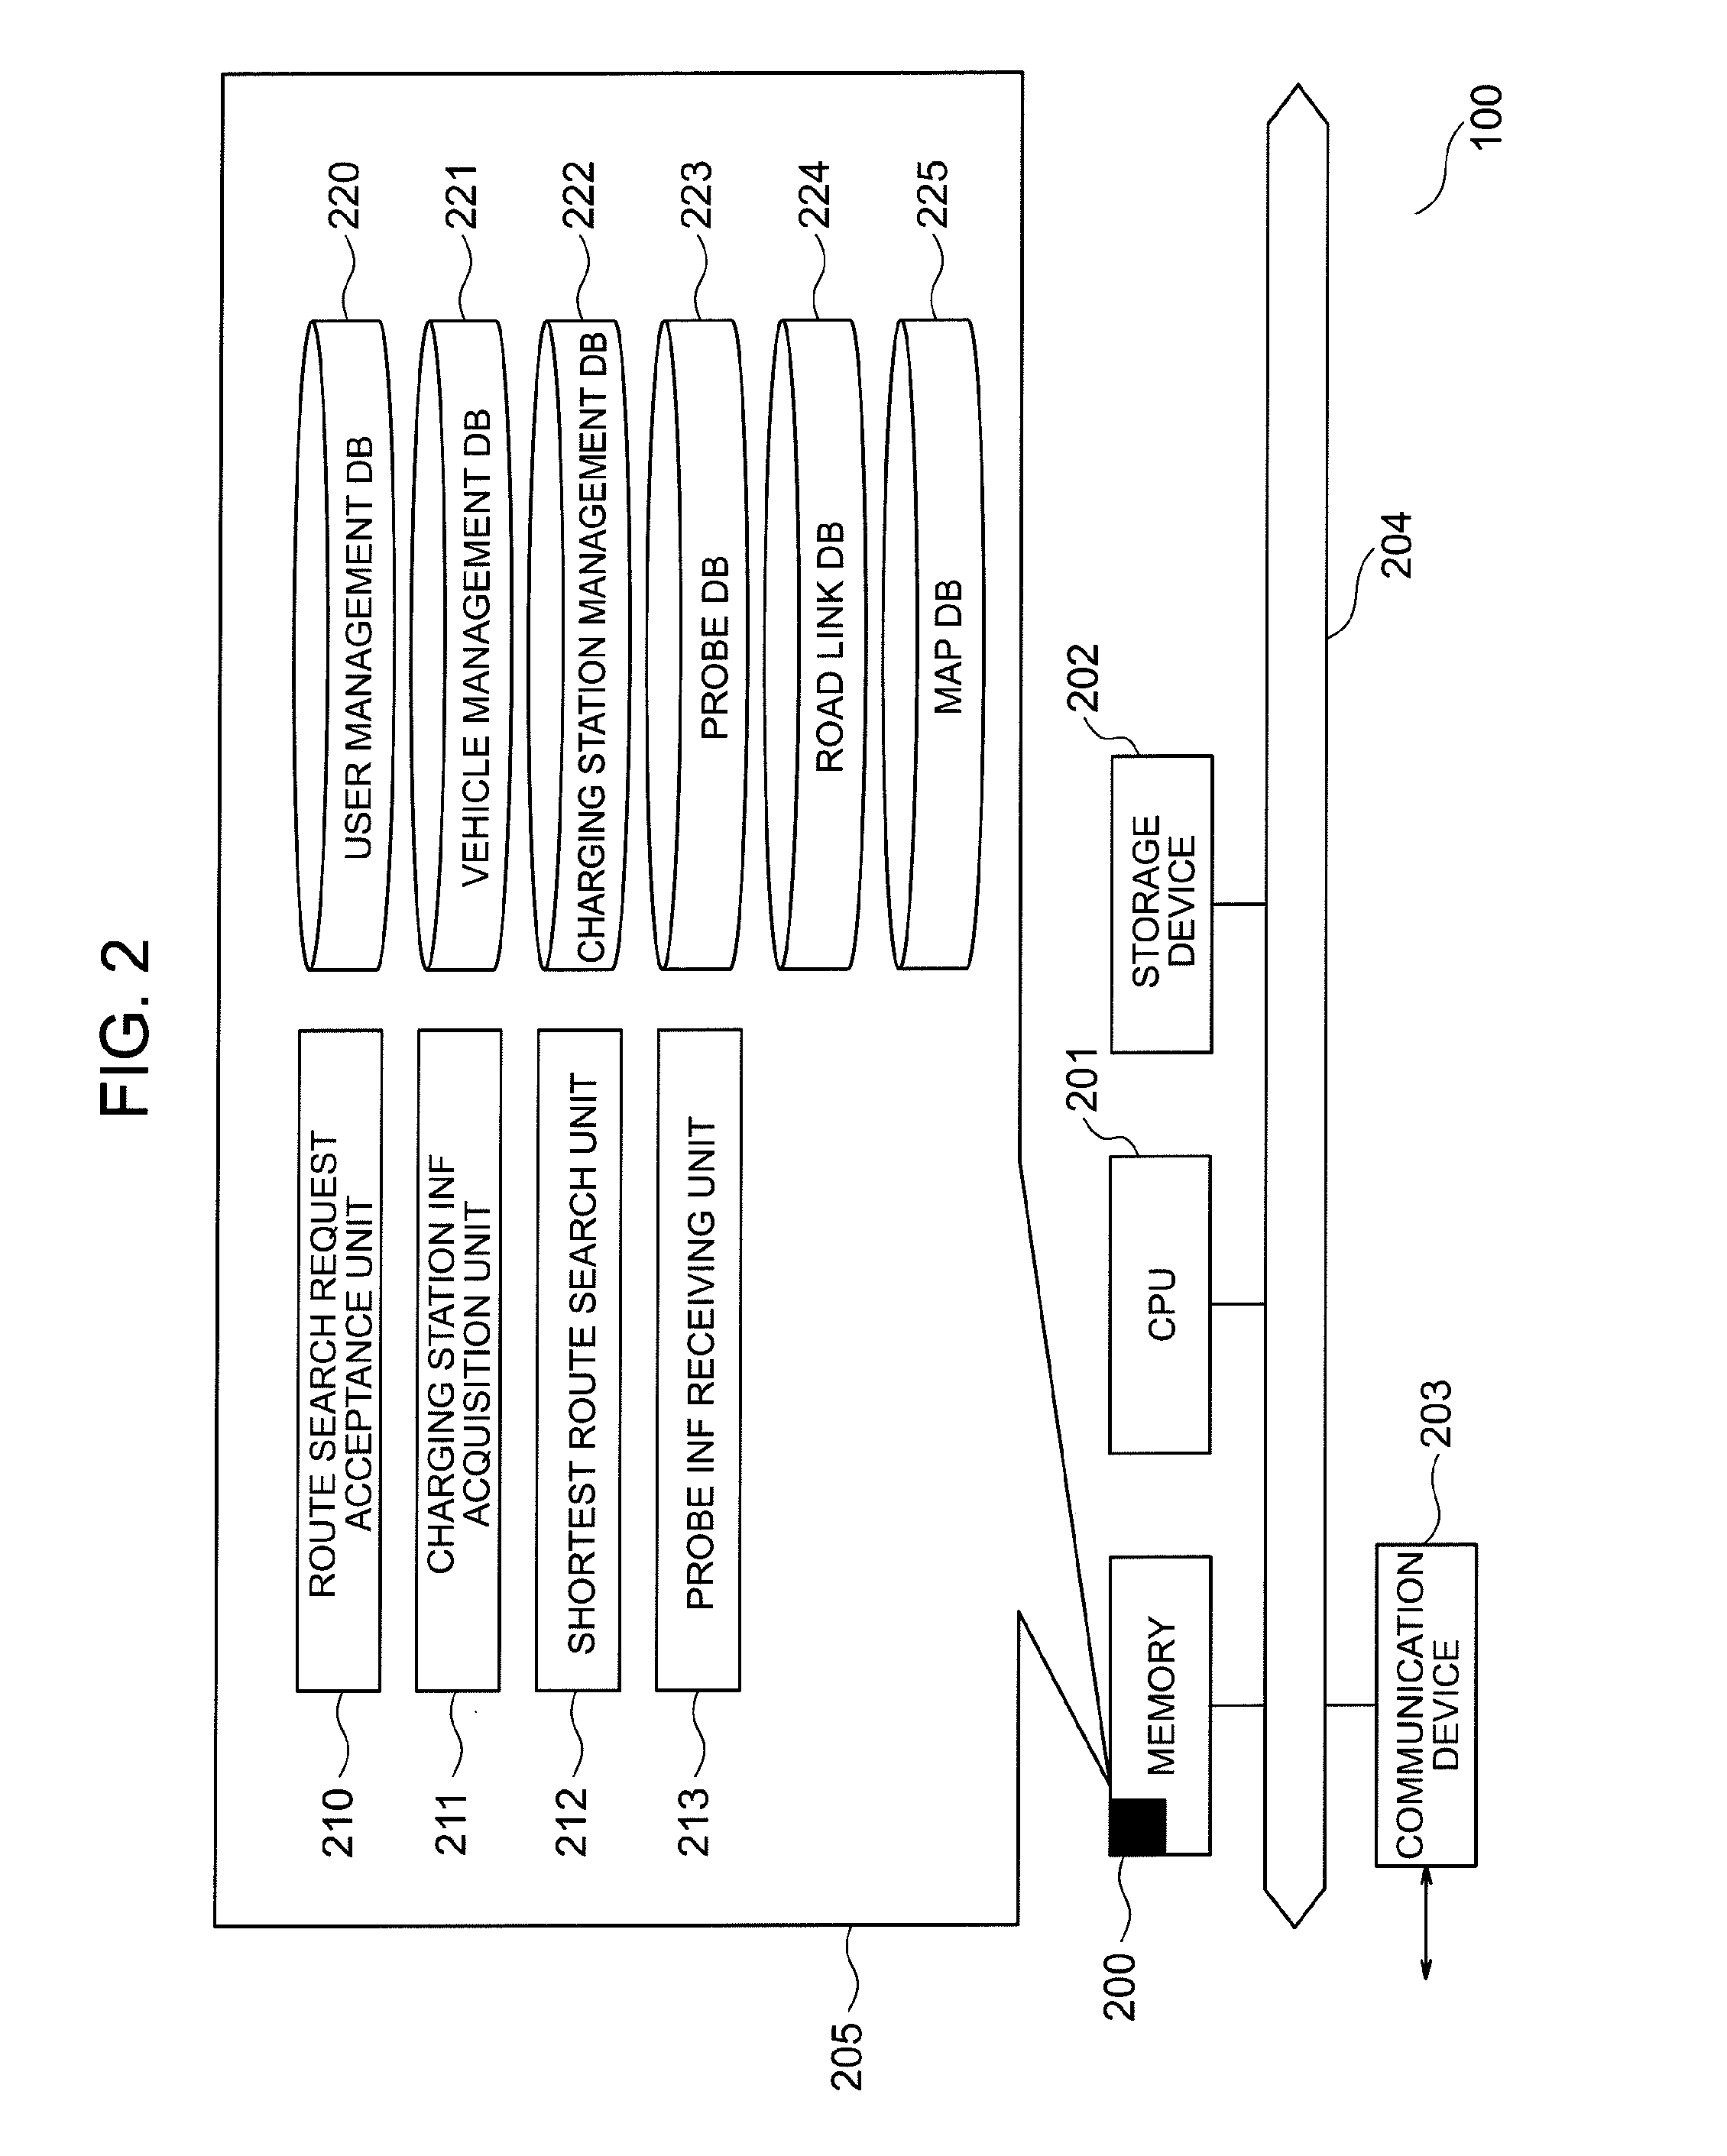 Navigation system for electric vehicle